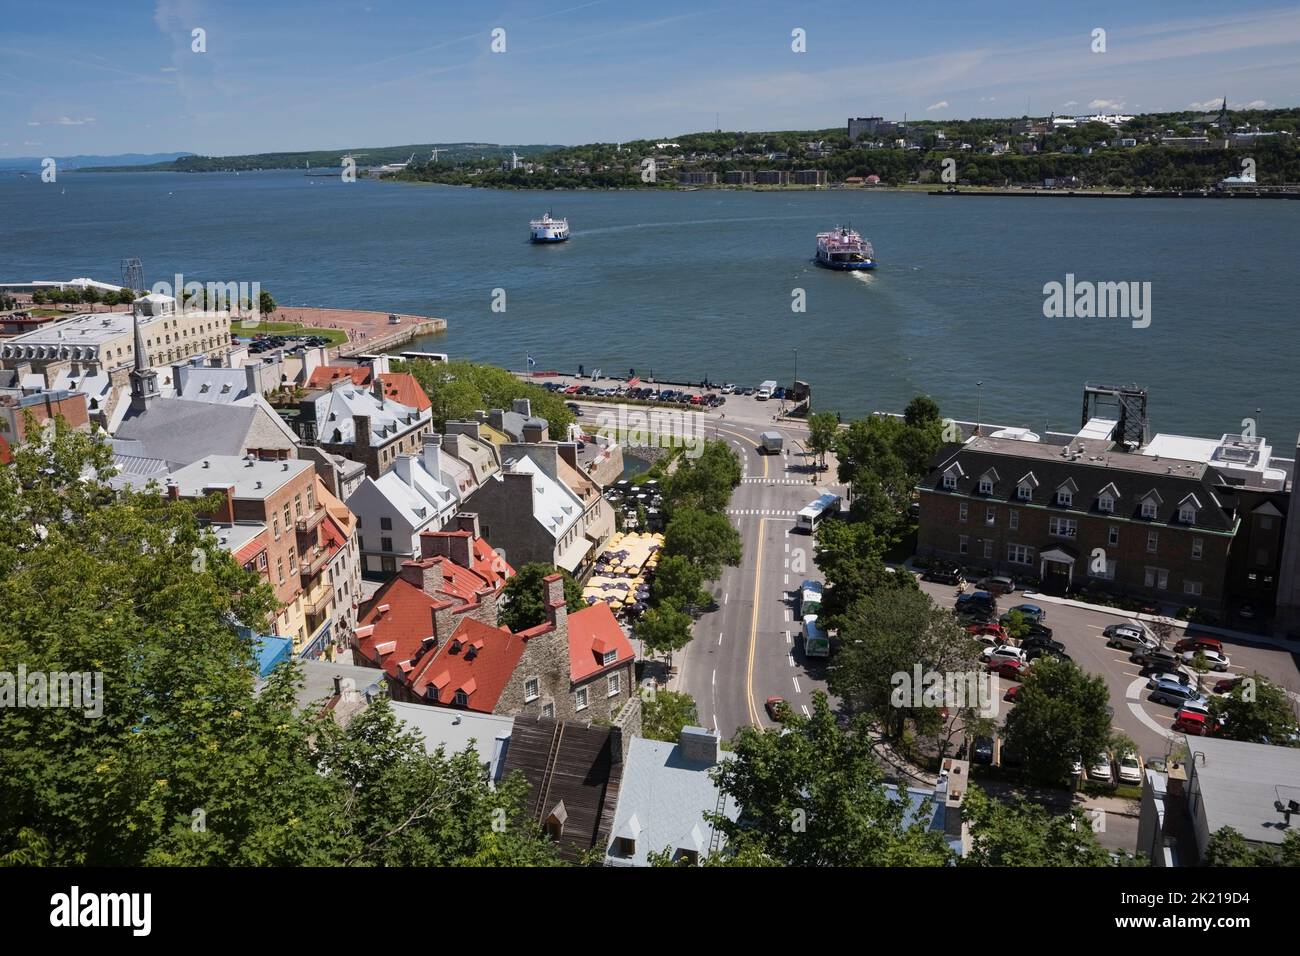 View of Boul. Champlain and the Lower Town area of Old Quebec City, Quebec, Canada Stock Photo